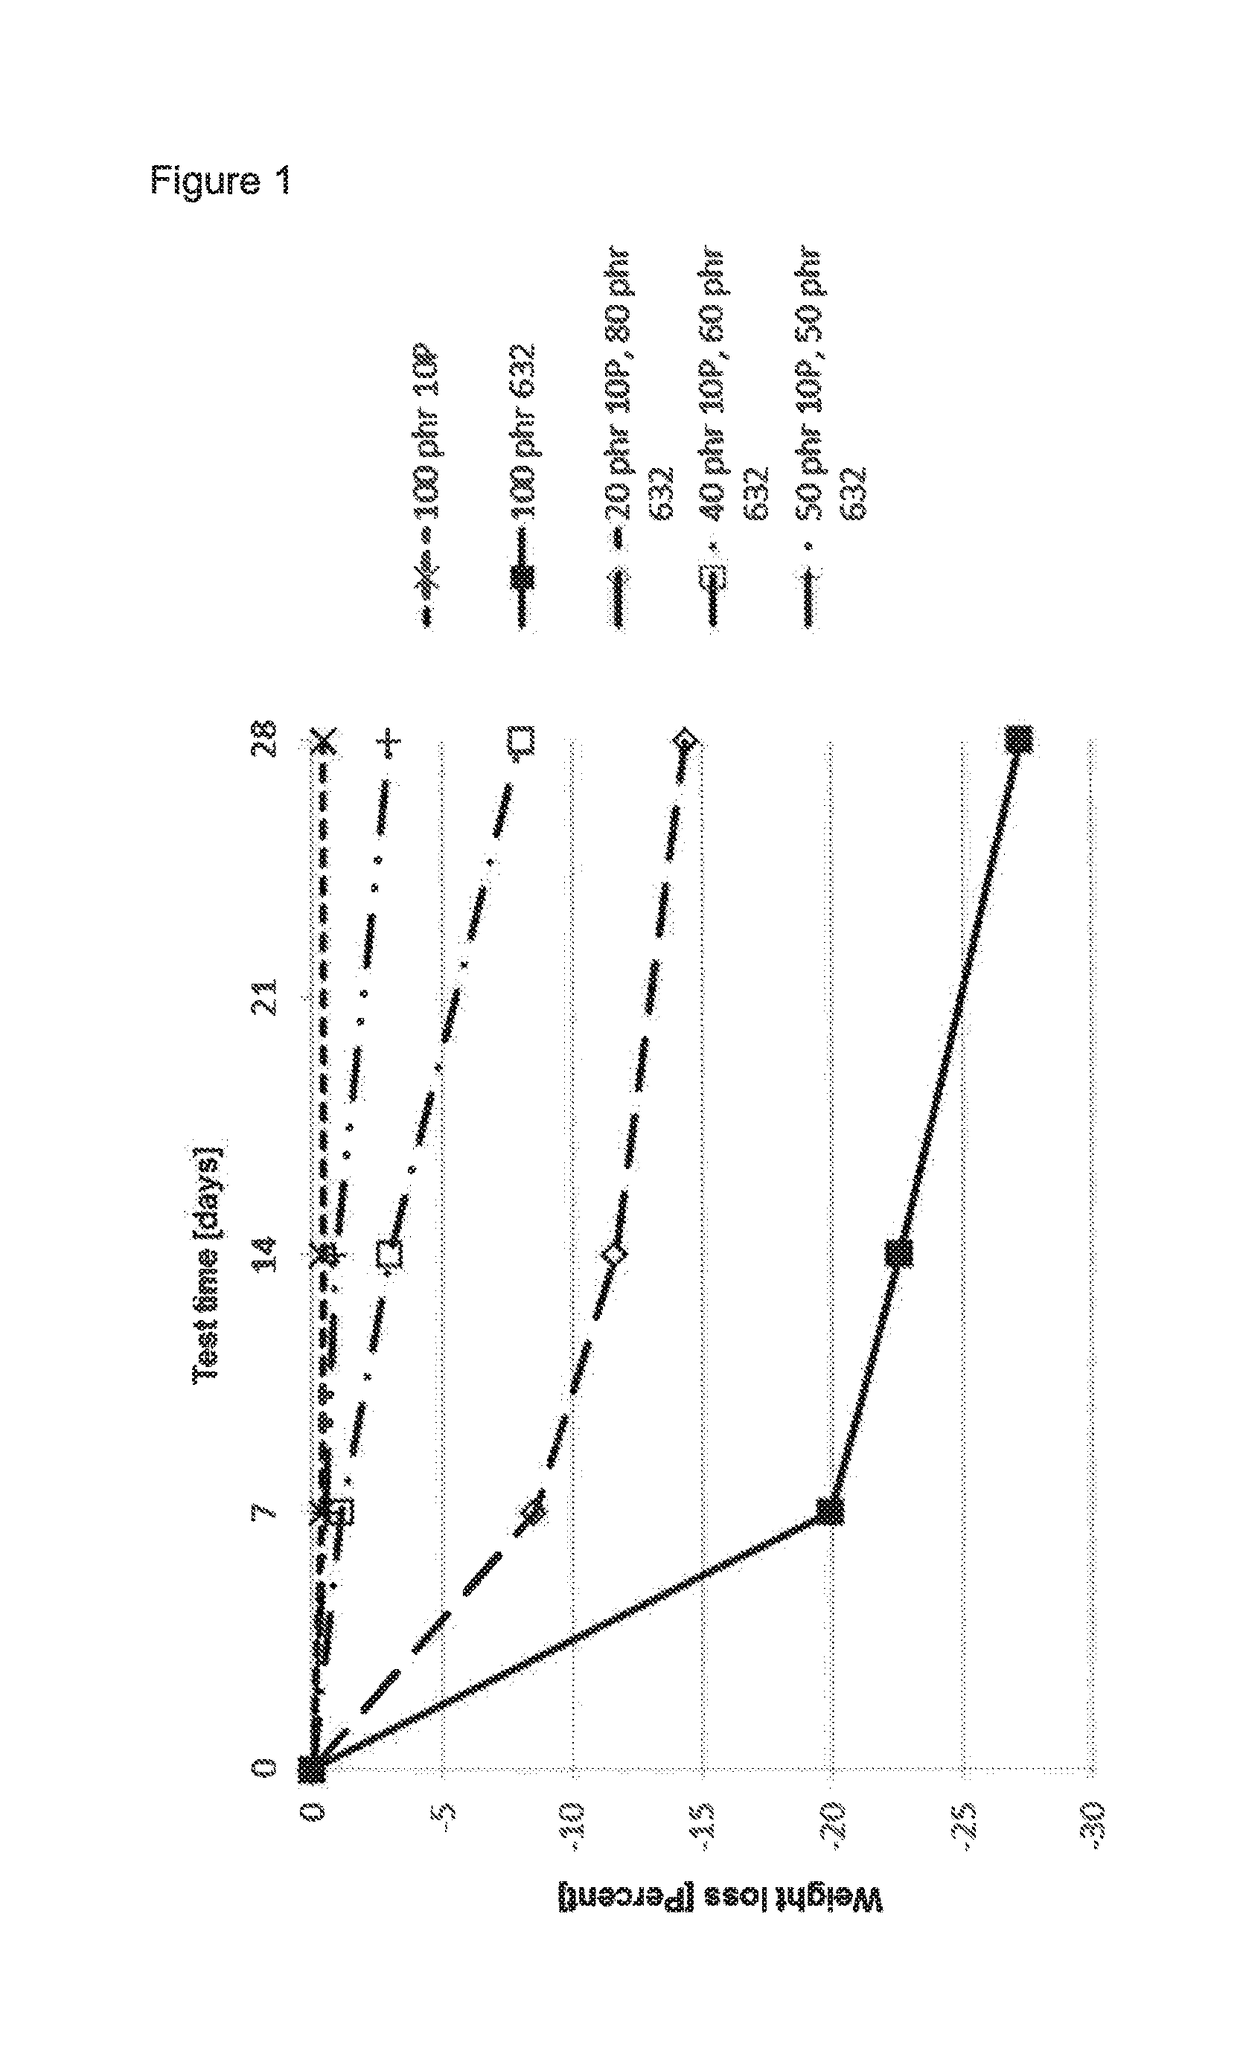 Plasticizer composition containing polymeric dicarboxylic acid esters and phthalic acid dialkyl esters